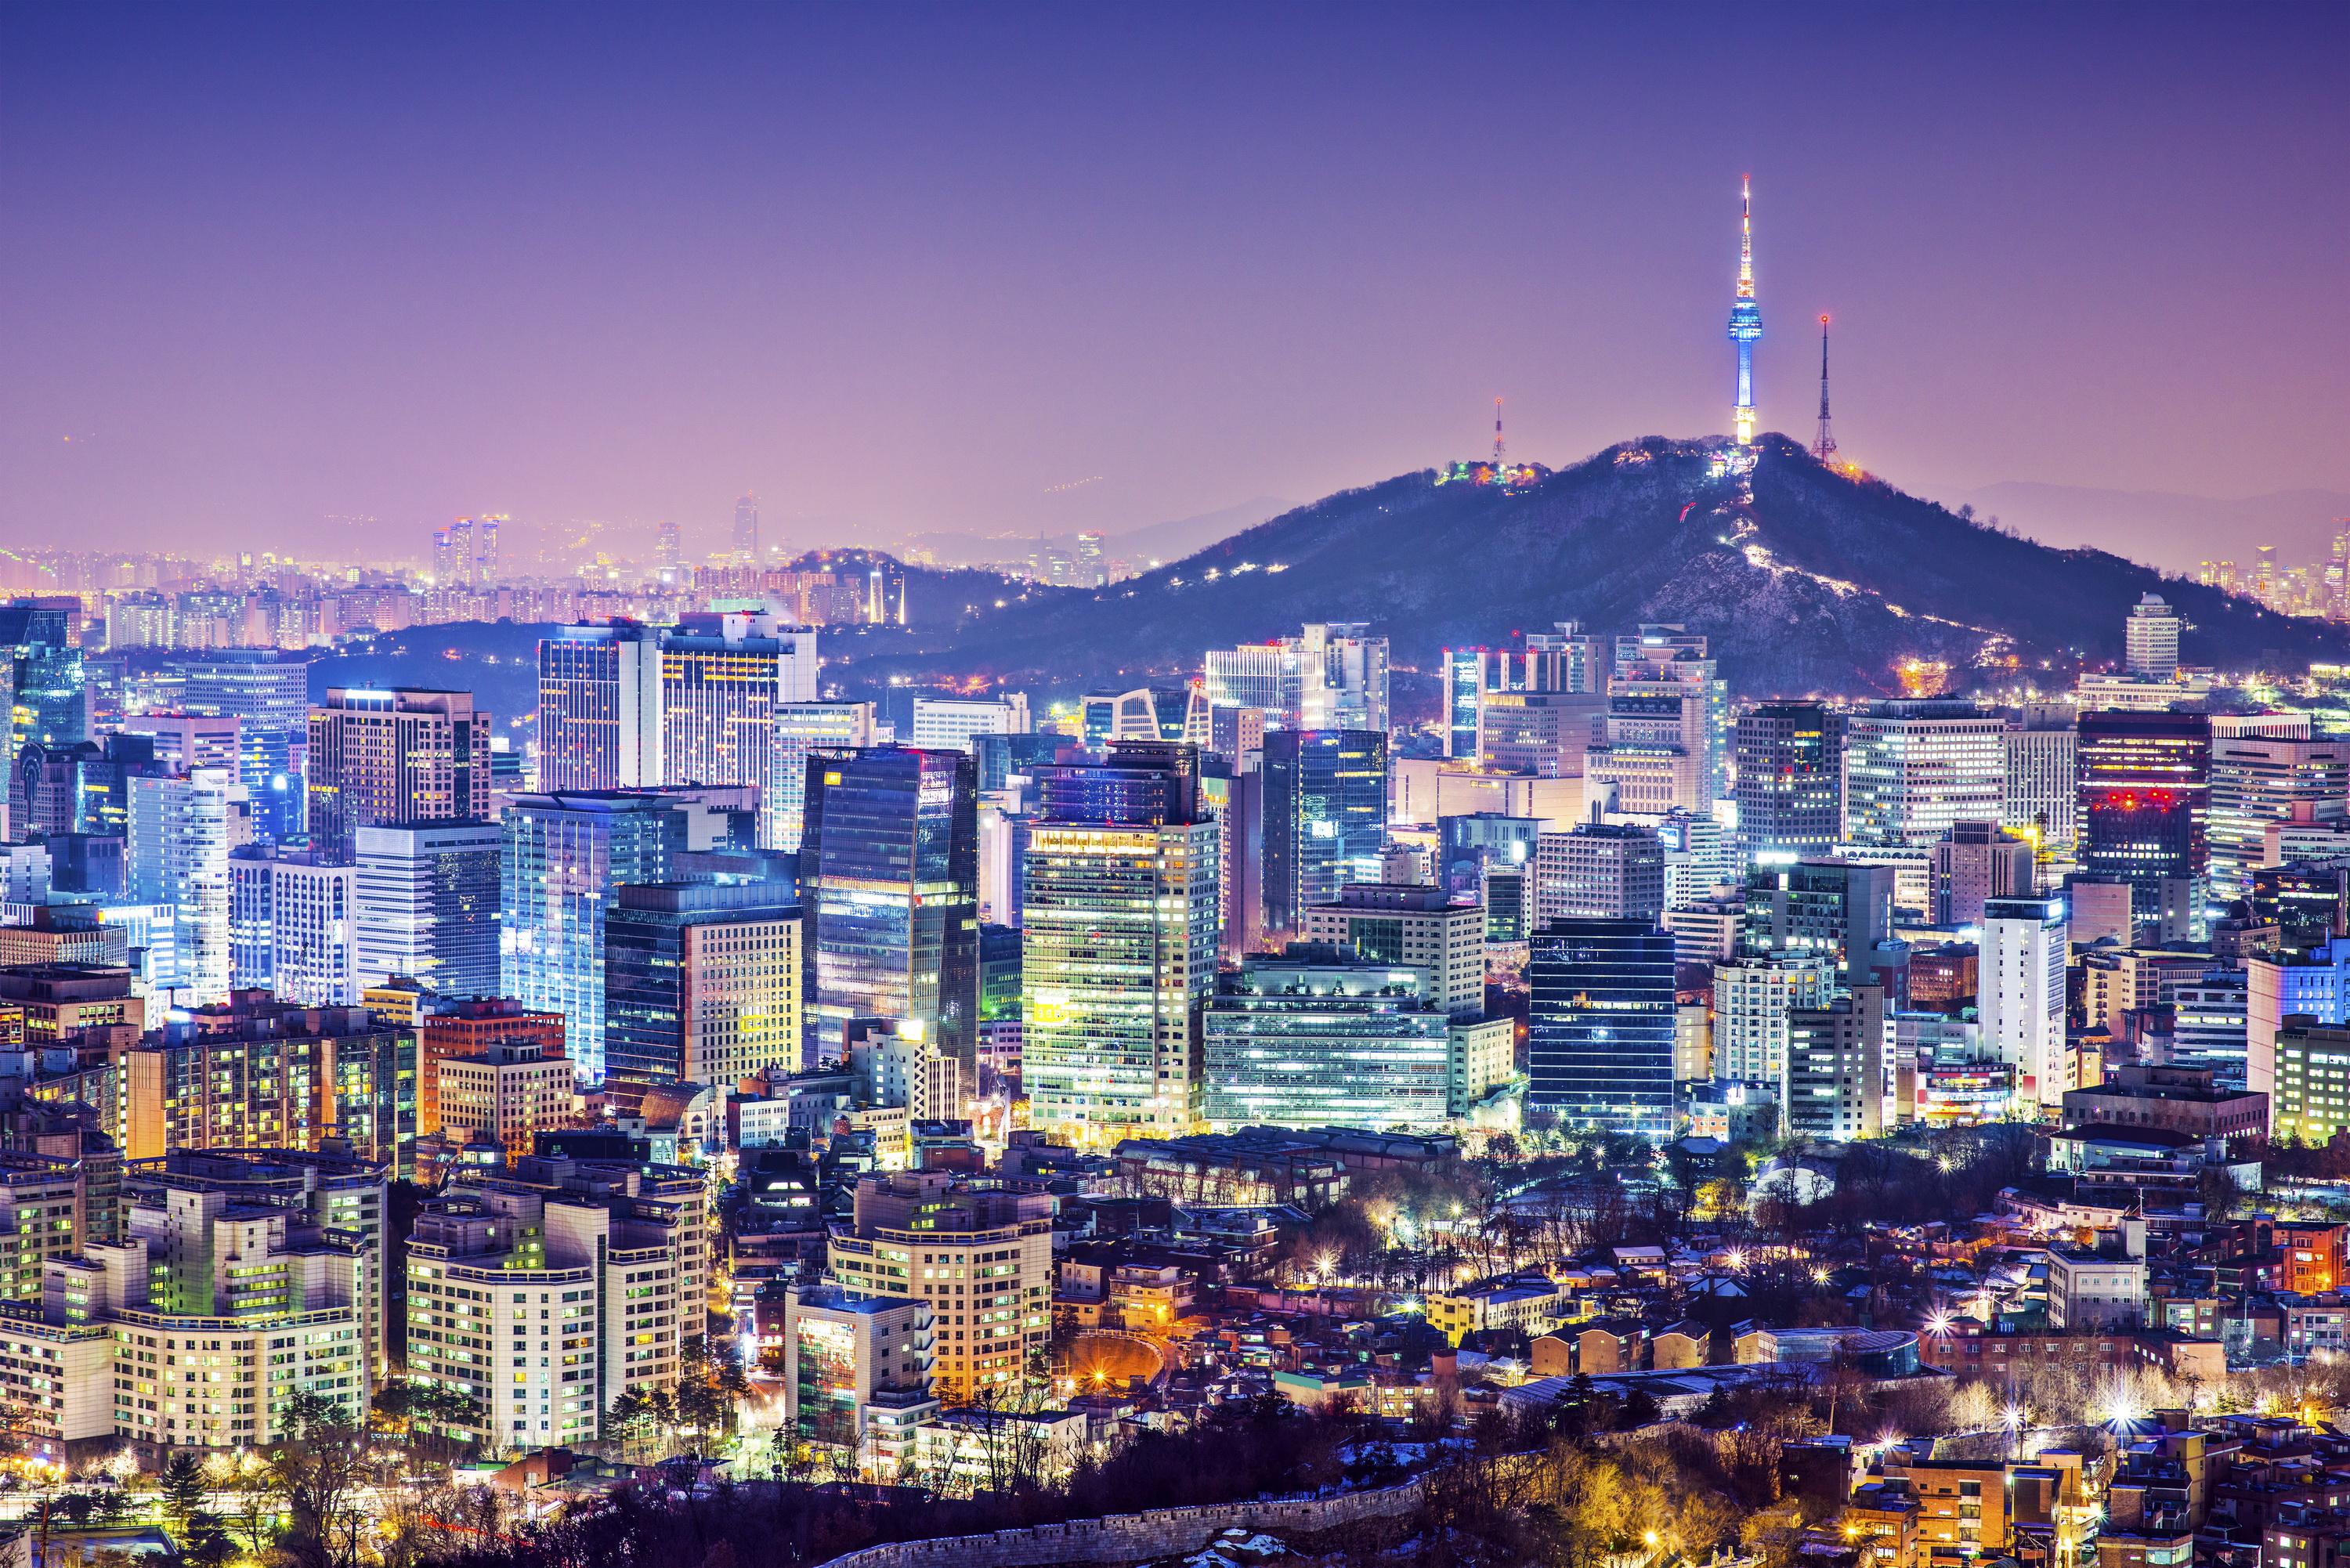 3000 x 2002 · jpeg - Seoul Wallpapers, Pictures, Images